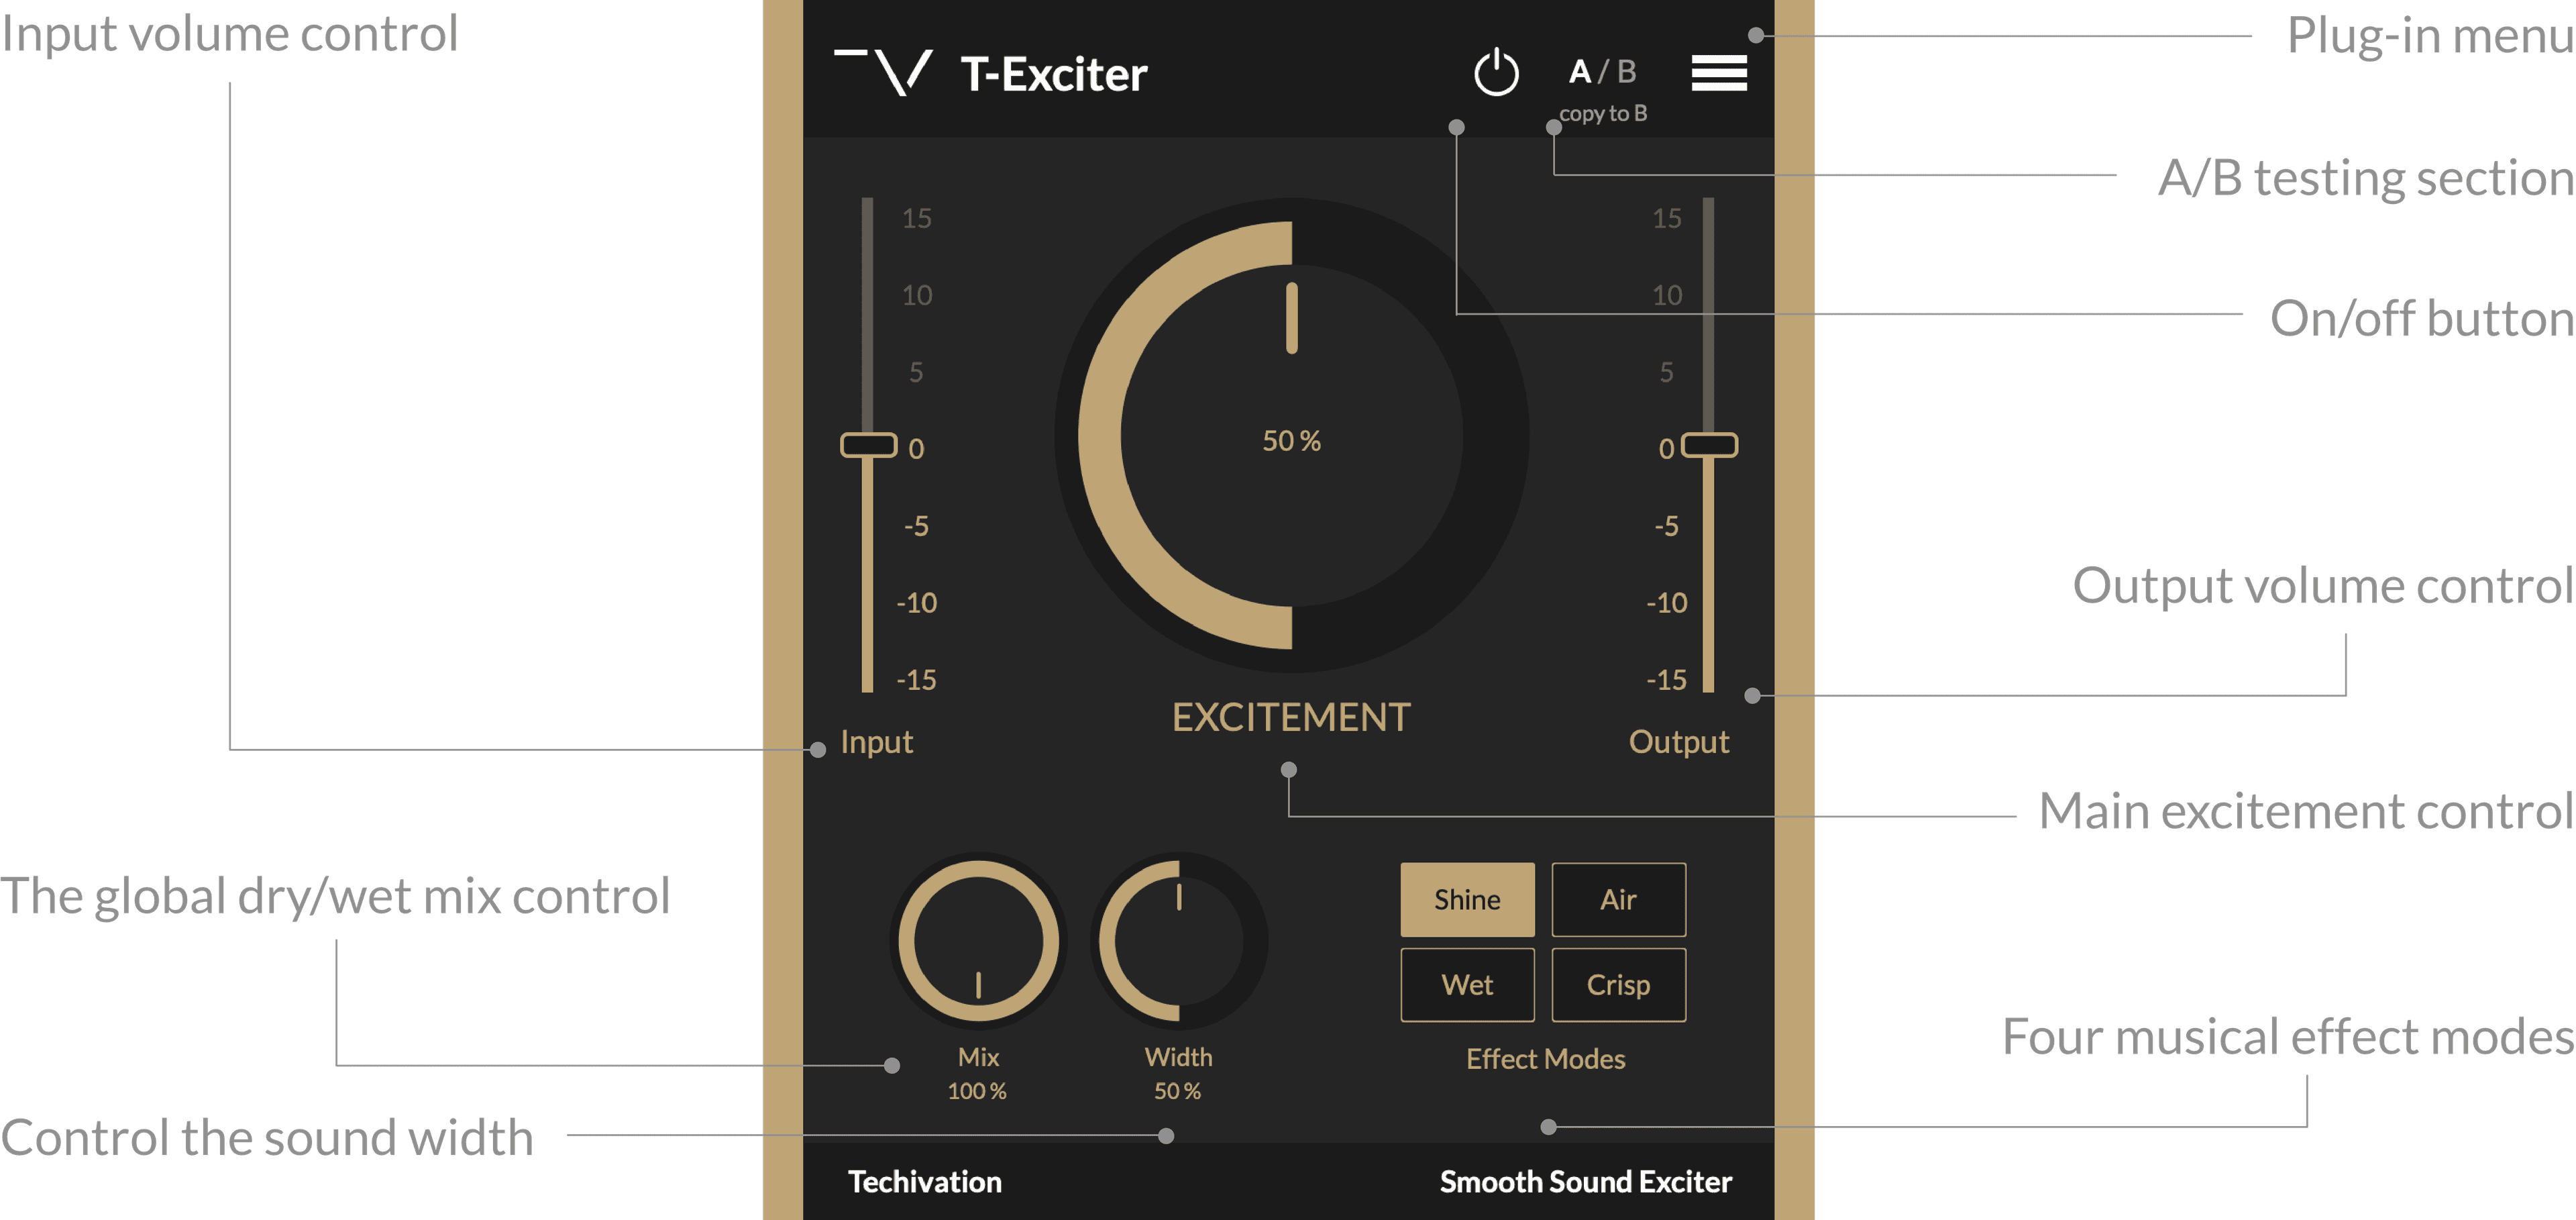 T-Exciter Features